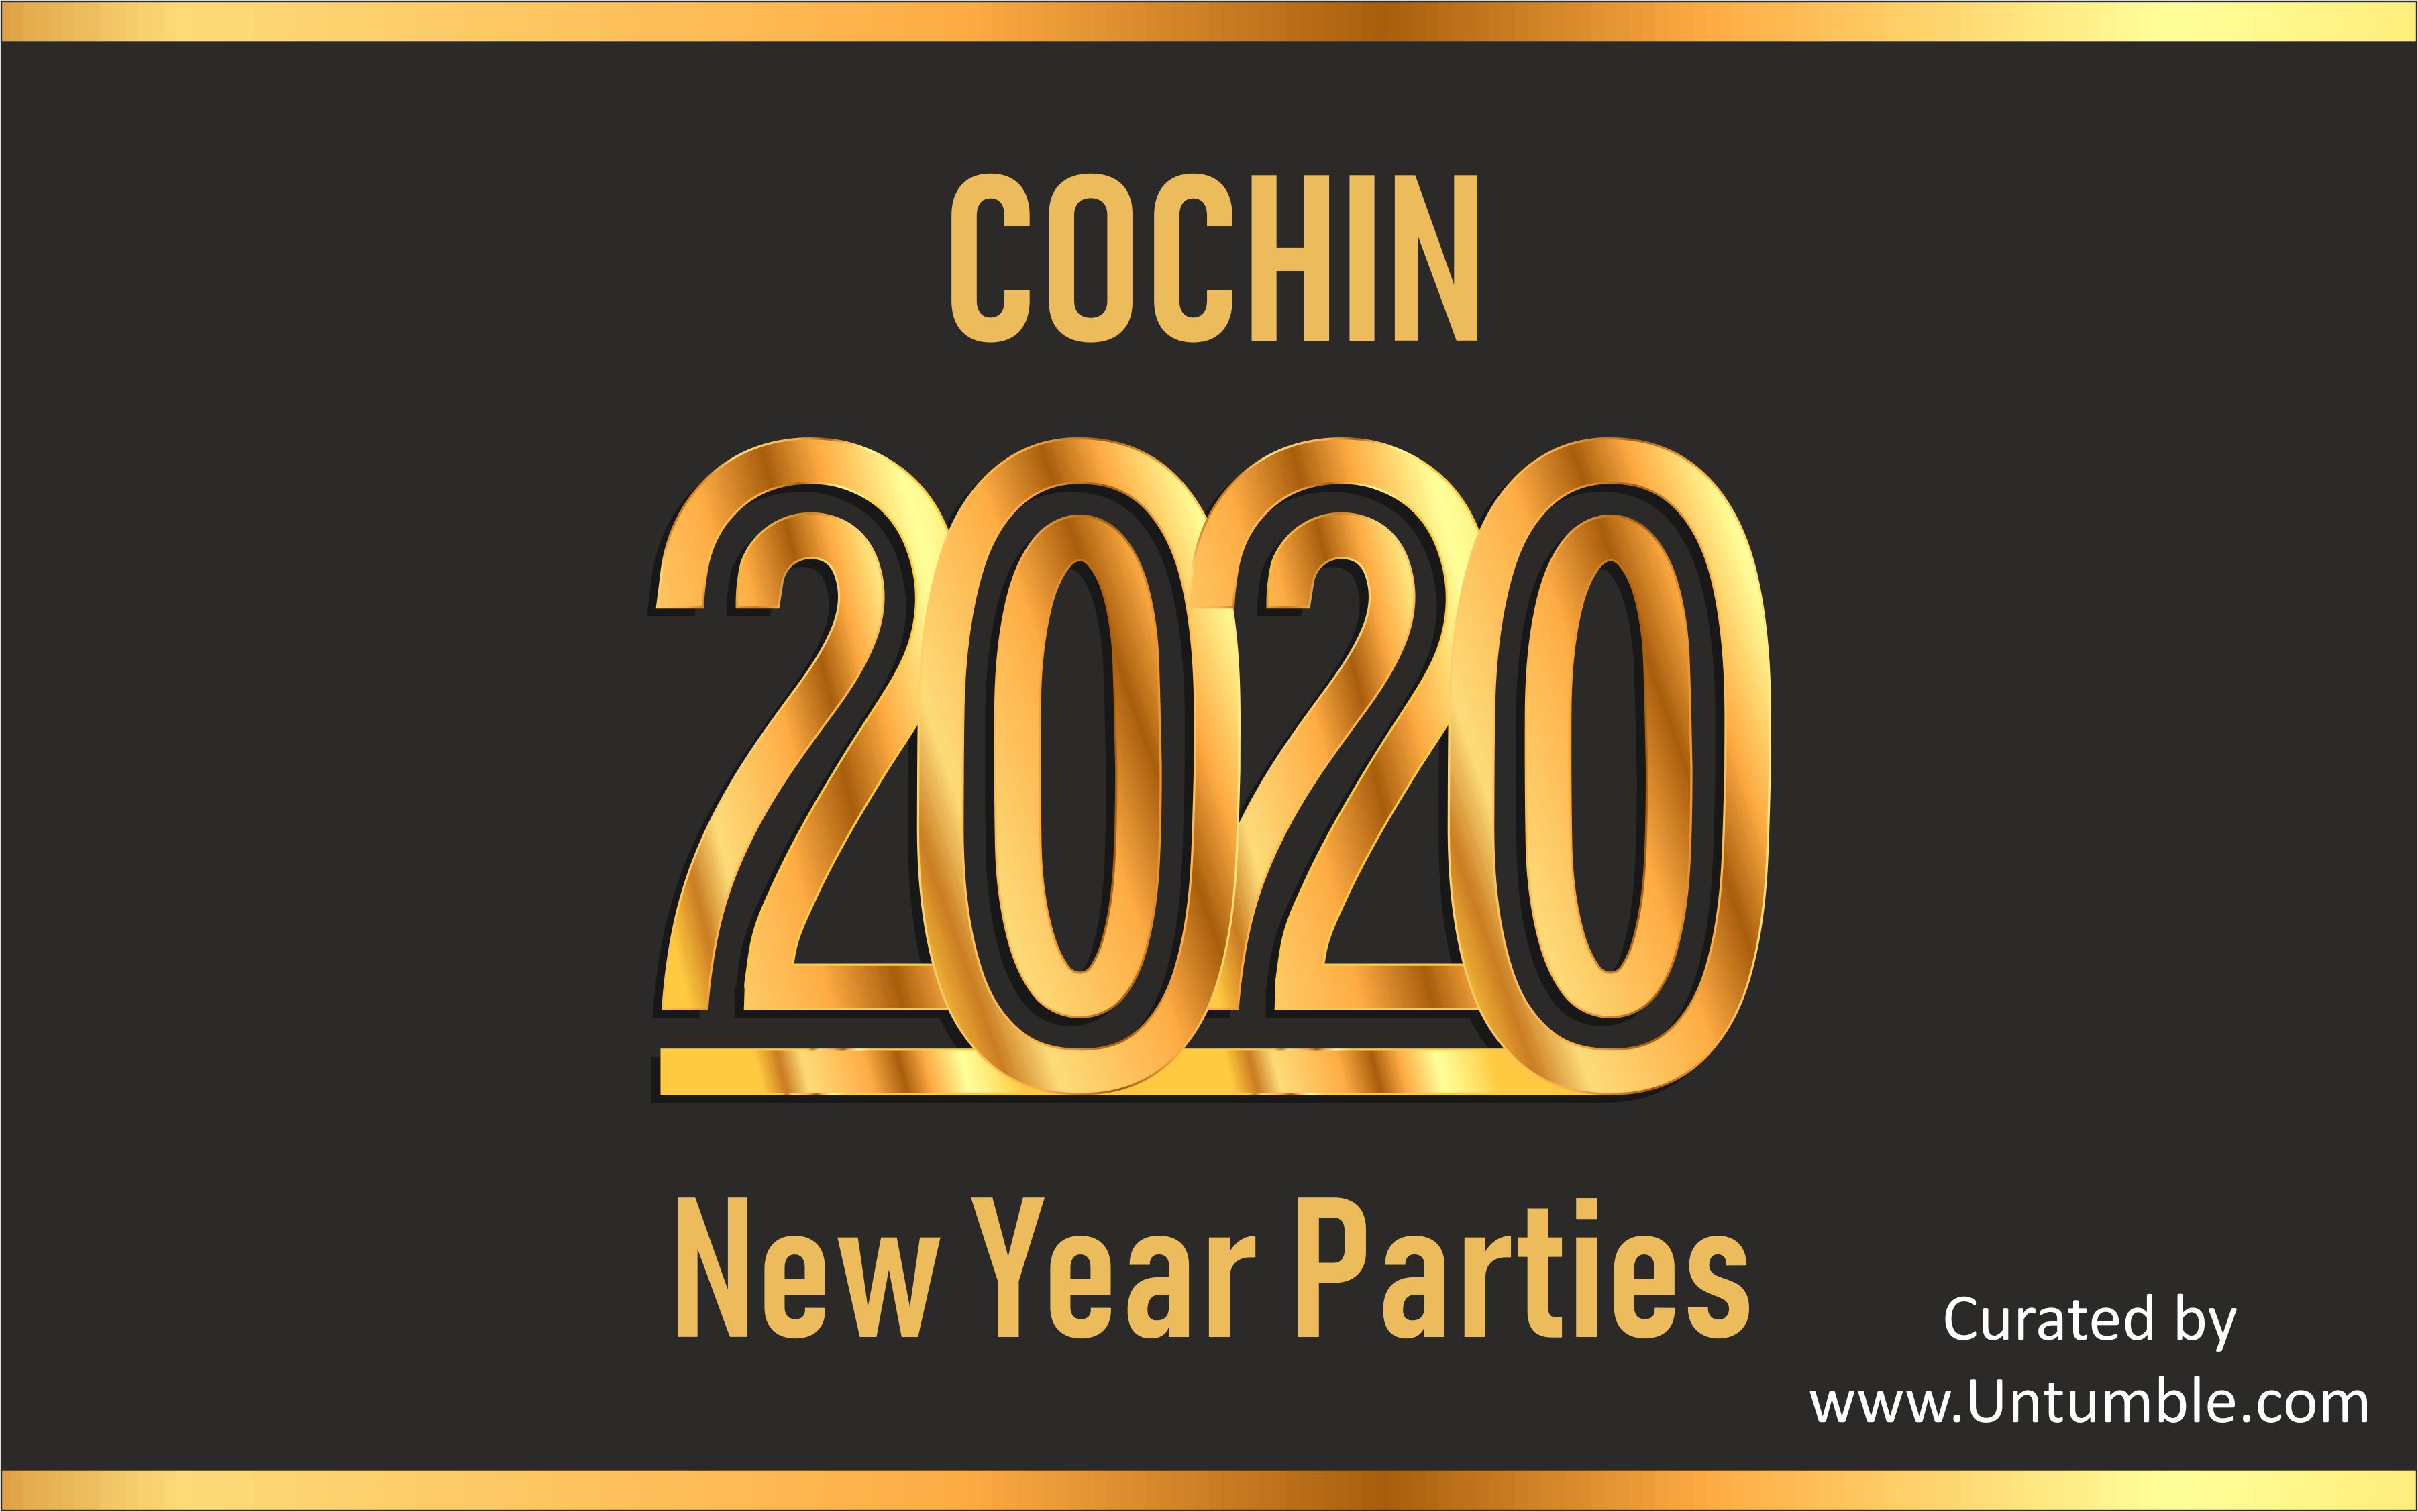 New Year 2020 Parties in Kochi